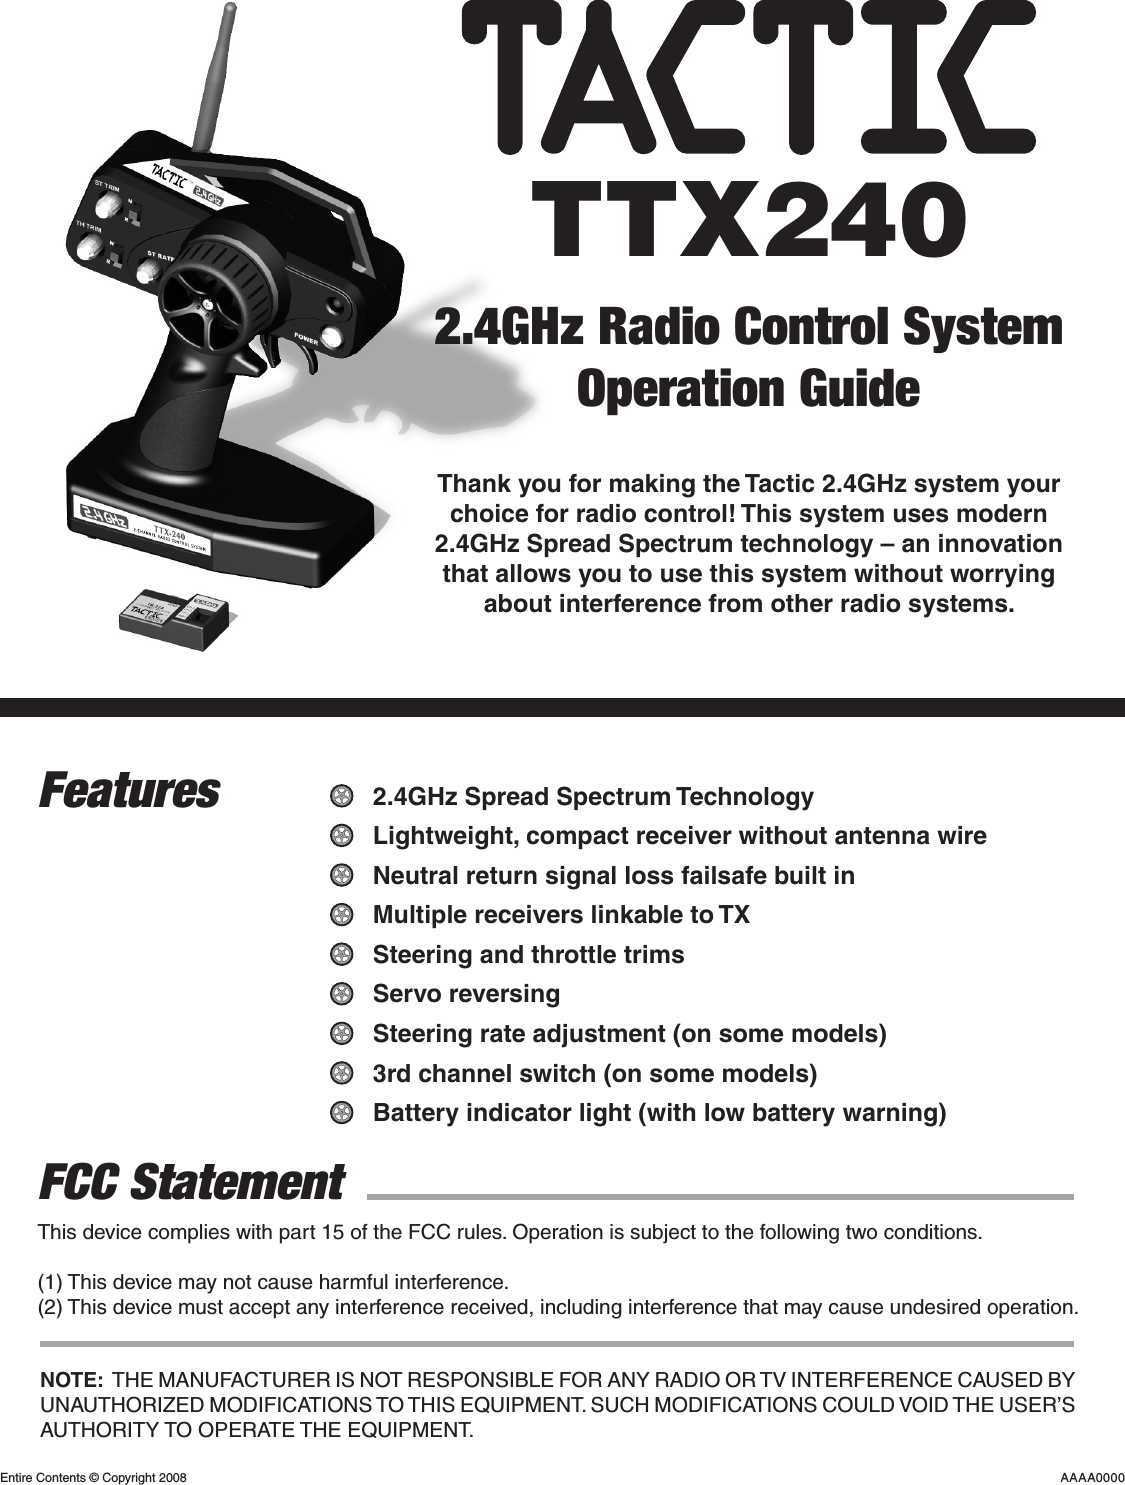 This device complies with part 15 of the FCC rules. Operation is subject to the following two conditions.(1) This device may not cause harmful interference.(2) This device must accept any interference received, including interference that may cause undesired operation.TTX2402.4GHz Radio Control SystemOperation GuideThank you for making the Tactic 2.4GHz system your choice for radio control! This system uses modern 2.4GHz Spread Spectrum technology – an innovation that allows you to use this system without worrying about interference from other radio systems.FeaturesFCC Statement2.4GHz Spread Spectrum TechnologyLightweight, compact receiver without antenna wireNeutral return signal loss failsafe built inMultiple receivers linkable to TXSteering and throttle trimsServo reversingSteering rate adjustment (on some models)3rd channel switch (on some models)Battery indicator light (with low battery warning)Entire Contents © Copyright 2008 AAAA0000NOTE:  THE MANUFACTURER IS NOT RESPONSIBLE FOR ANY RADIO OR TV INTERFERENCE CAUSED BY UNAUTHORIZED MODIFICATIONS TO THIS EQUIPMENT. SUCH MODIFICATIONS COULD VOID THE USER’S AUTHORITY TO OPERATE THE EQUIPMENT.